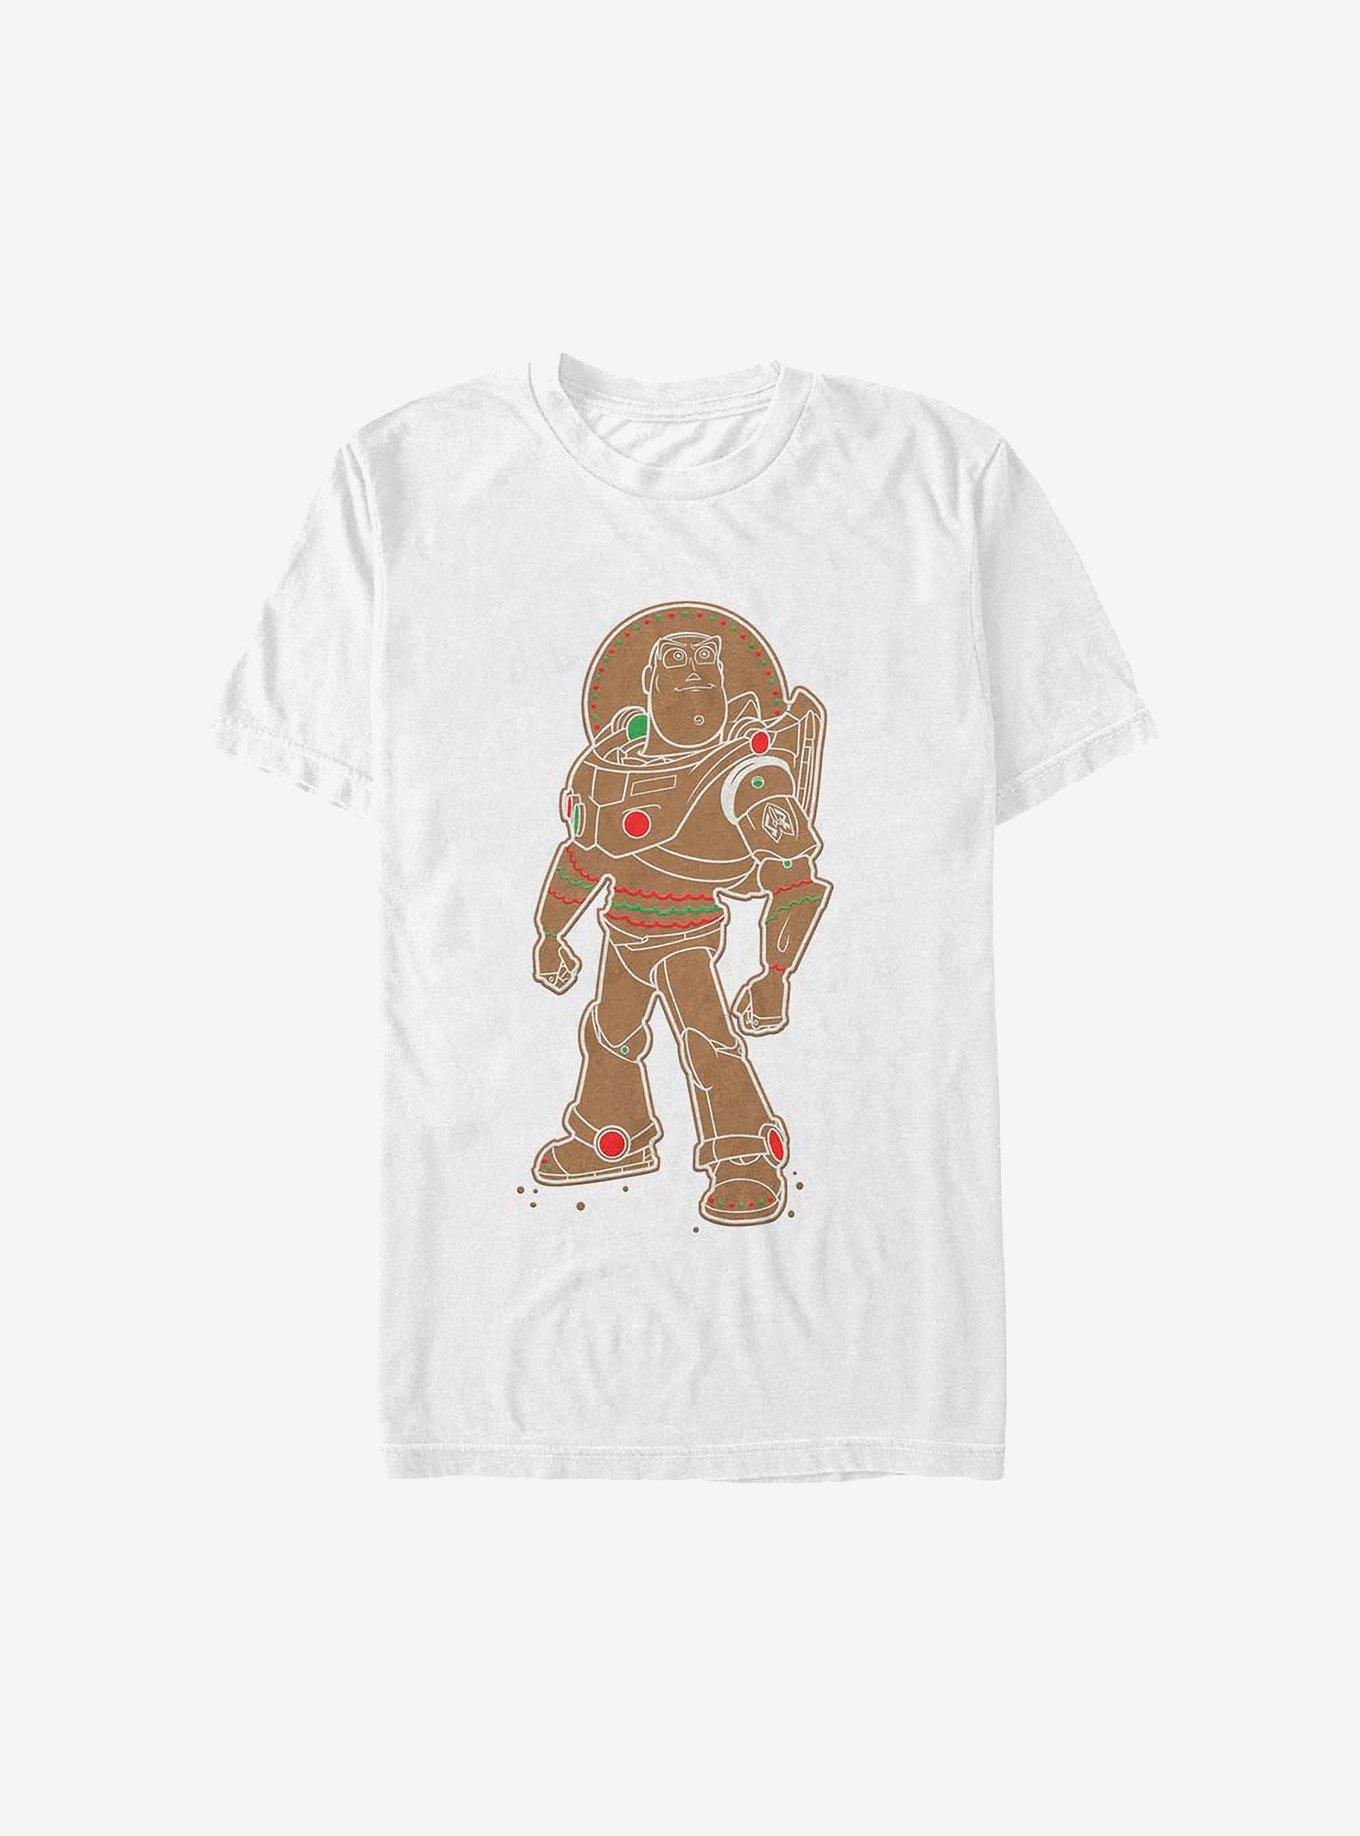 Disney Pixar Toy Story Gingerbread Buzz Holiday T-Shirt, WHITE, hi-res